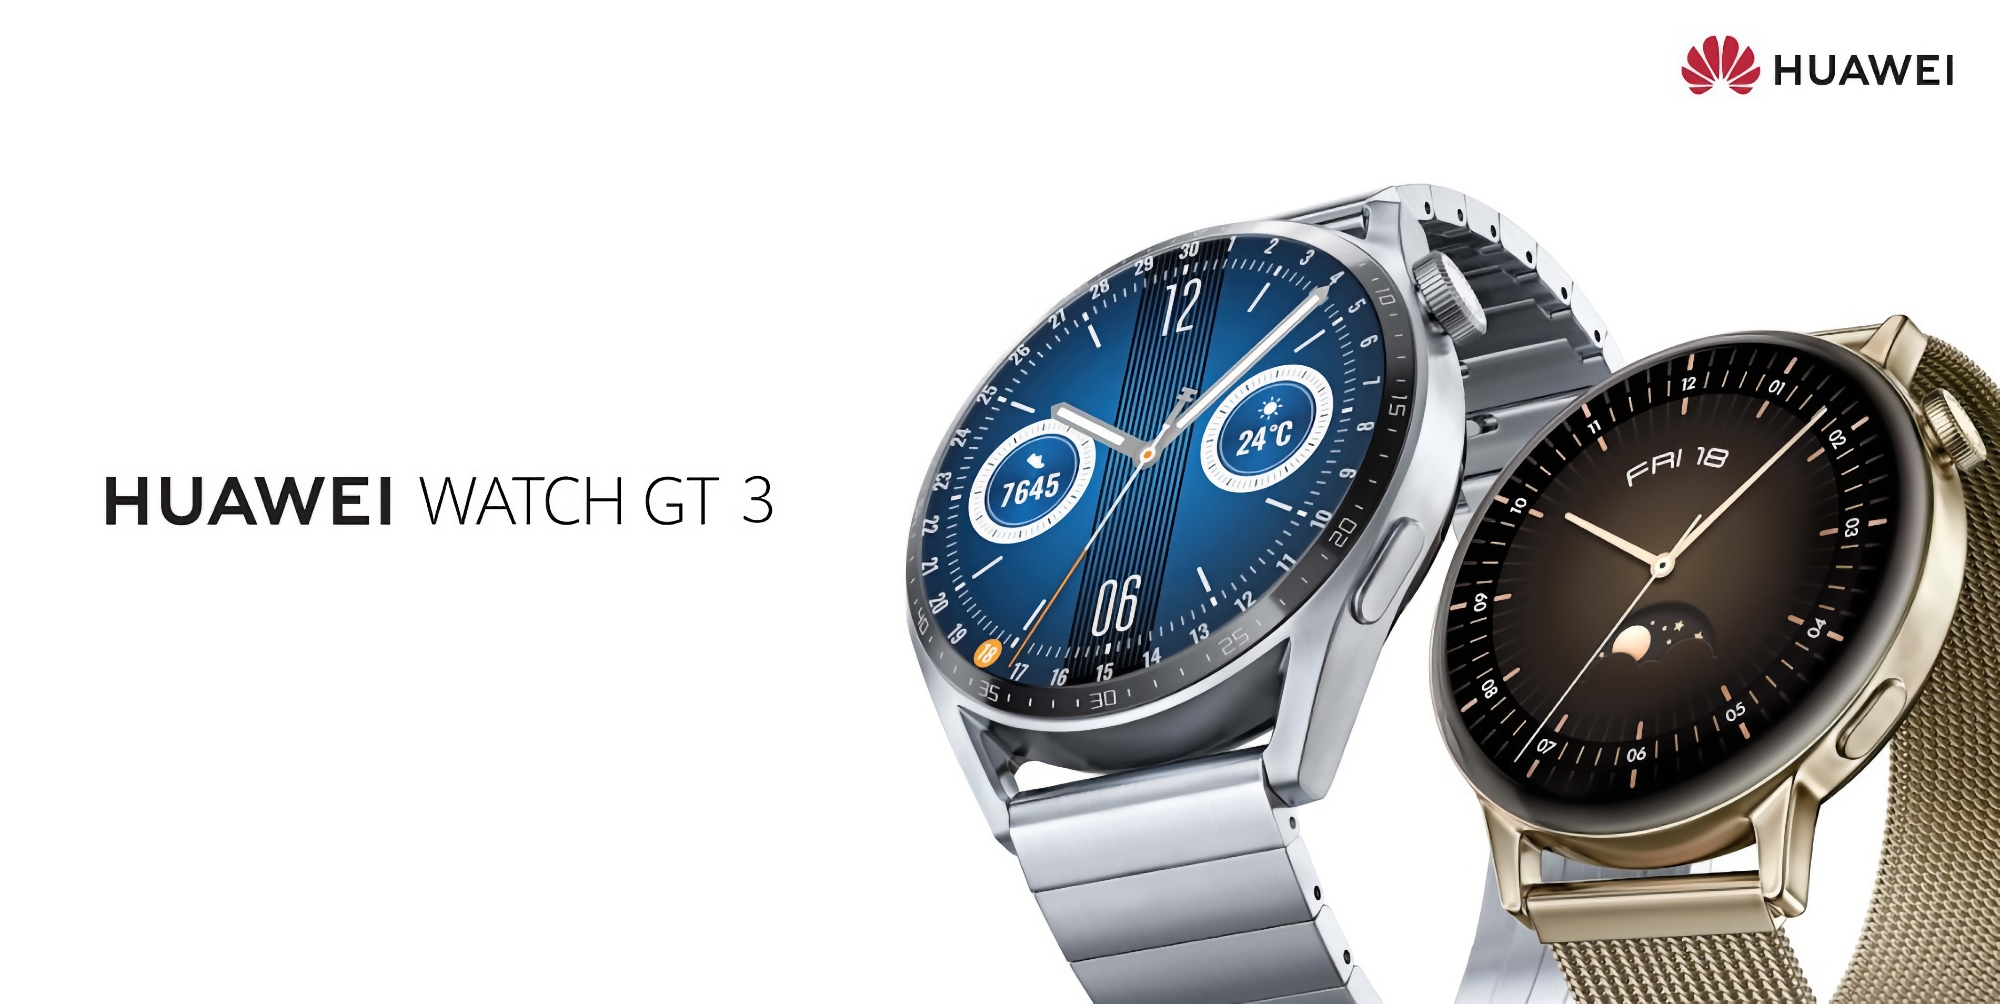 Huawei Watch GT 3 gets a lot of new features with the update